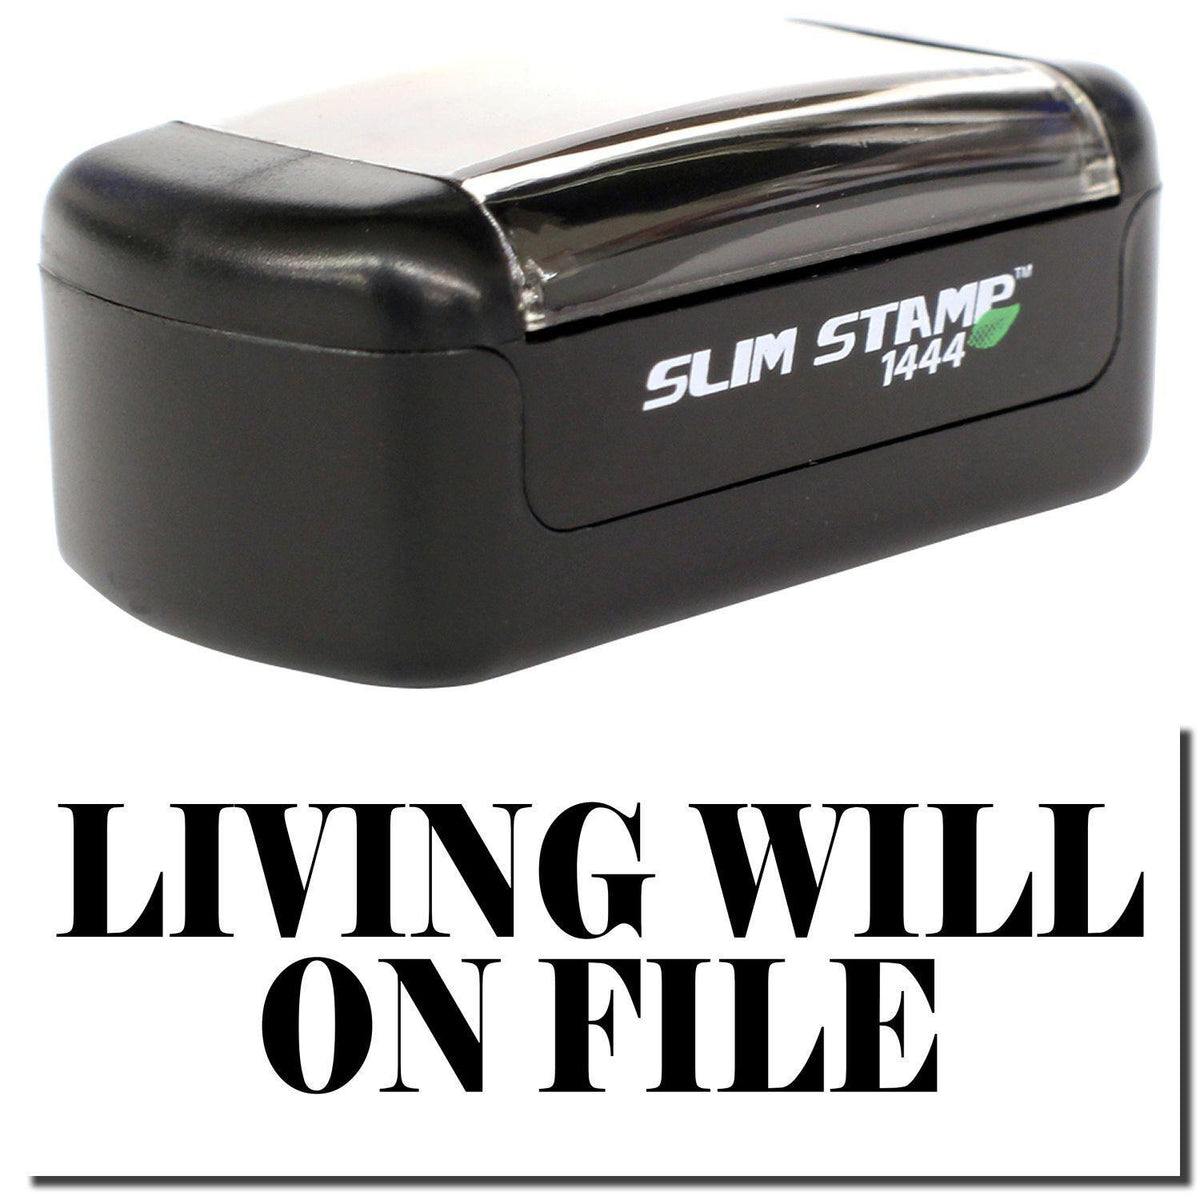 A stock office pre-inked stamp with a stamped image showing how the text &quot;LIVING WILL ON FILE&quot; is displayed after stamping.